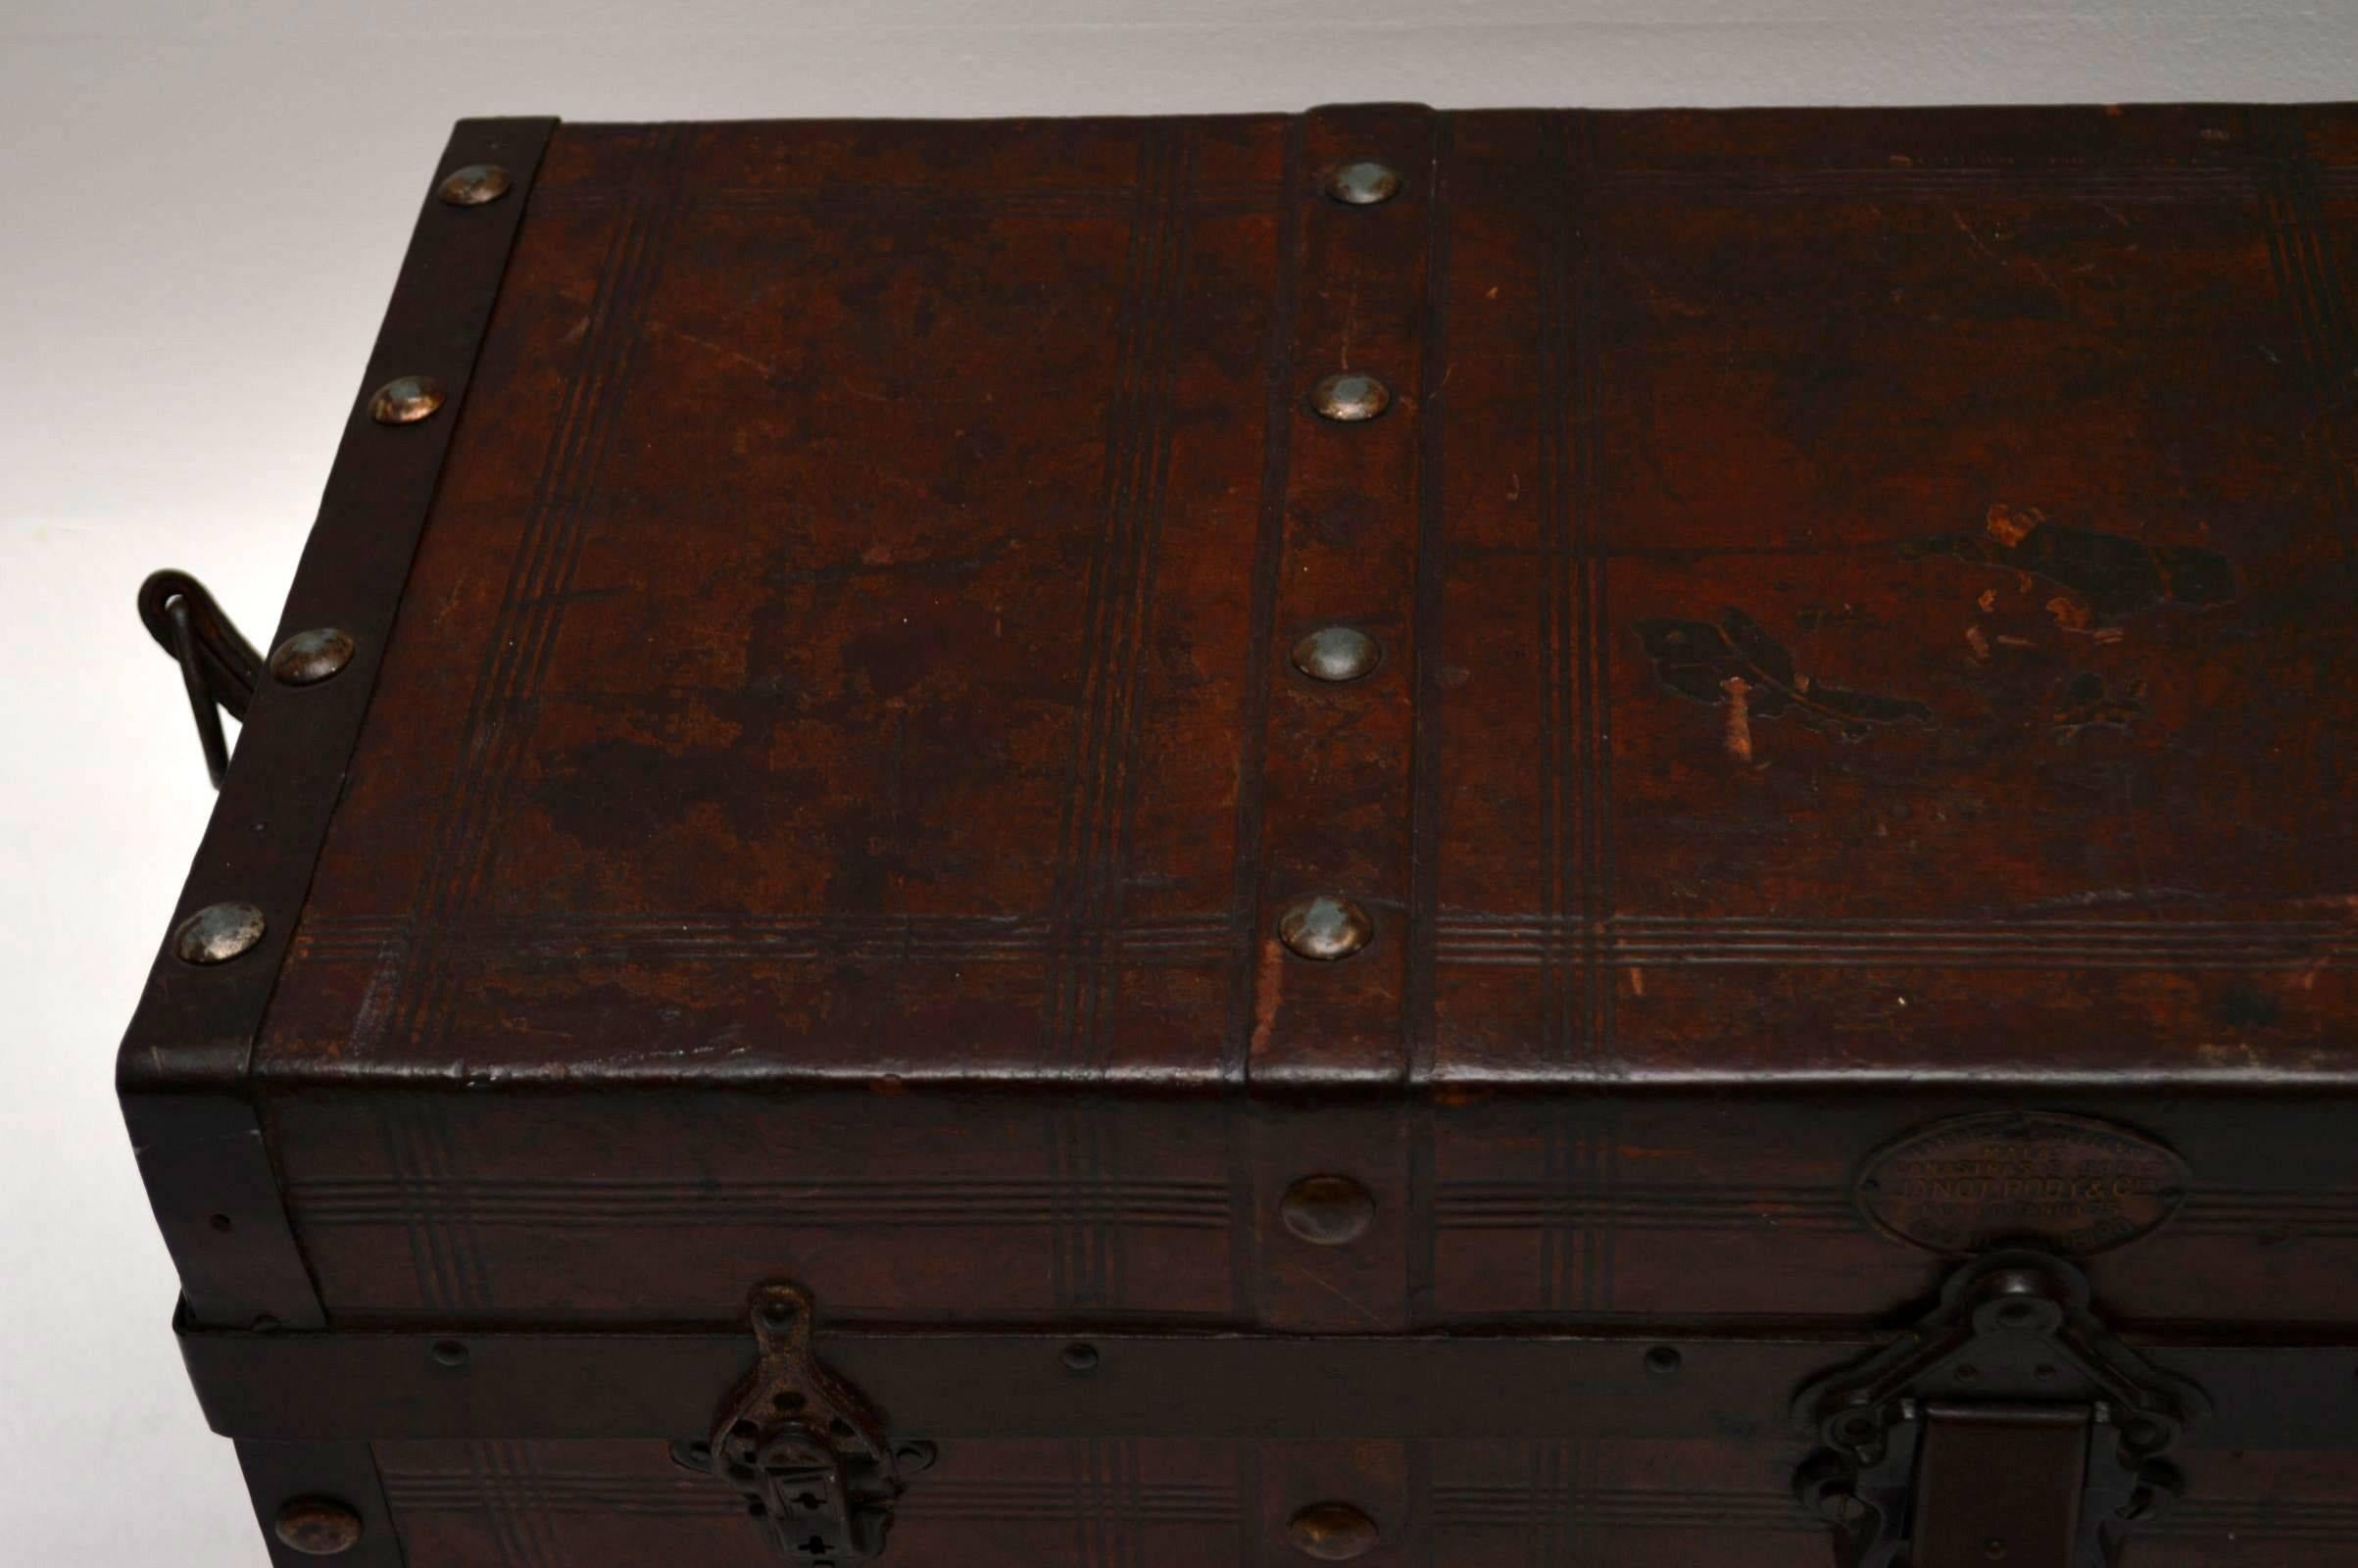 Very decorative antique leather bound travelling trunk that looks like it was made in Rio De Janeiro Brazil. It must be 19th century and it's in pretty good condition considering it's age and use. This trunk has a nice metal label on the outside and